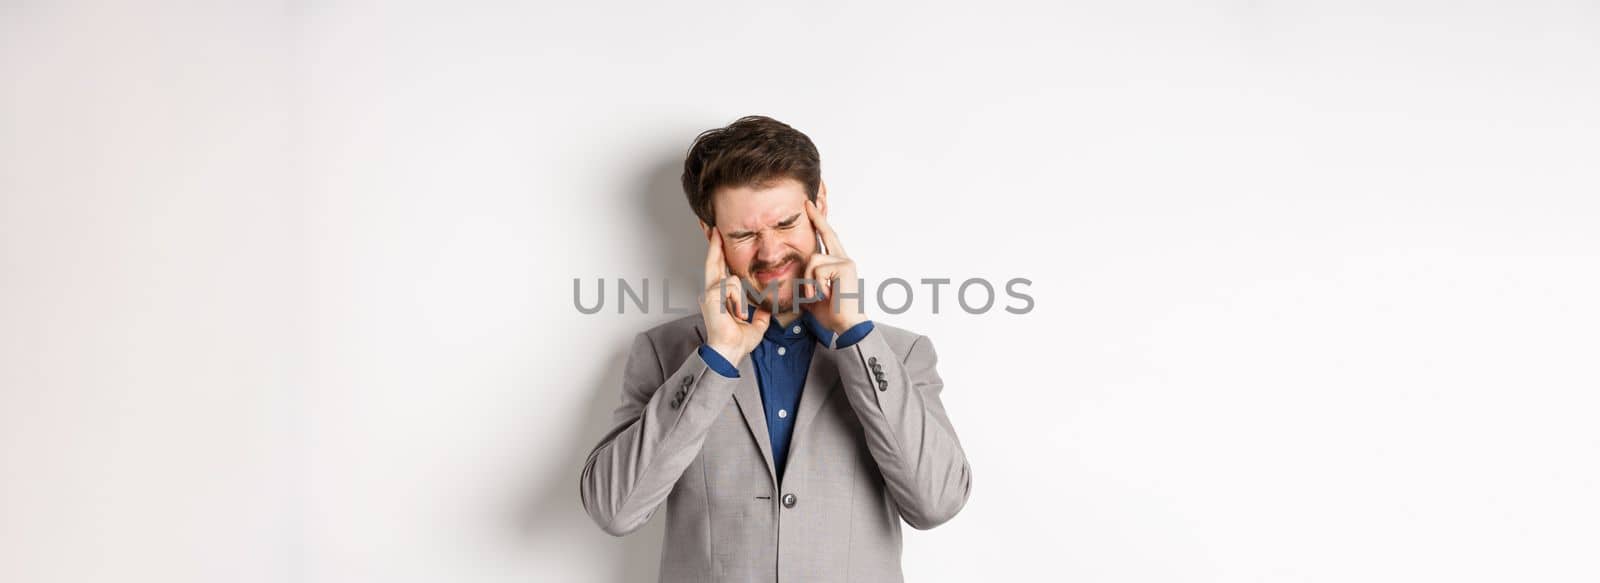 Business man in suit having headache, grimacing and touching head, suffer migraine, standing sick on white background.